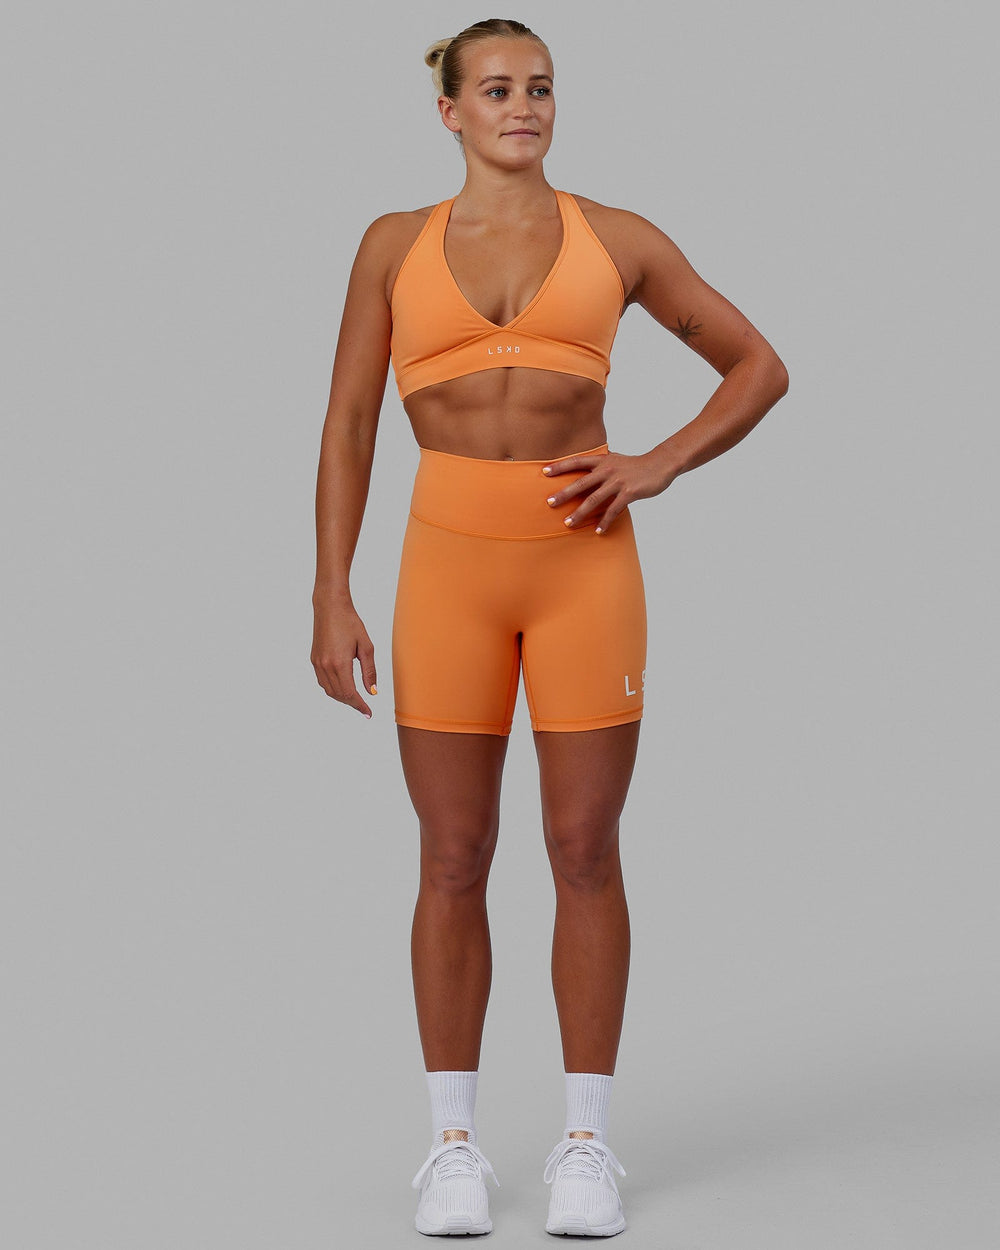 Woman wearing Evolved Mid Short Tight - Tangerine